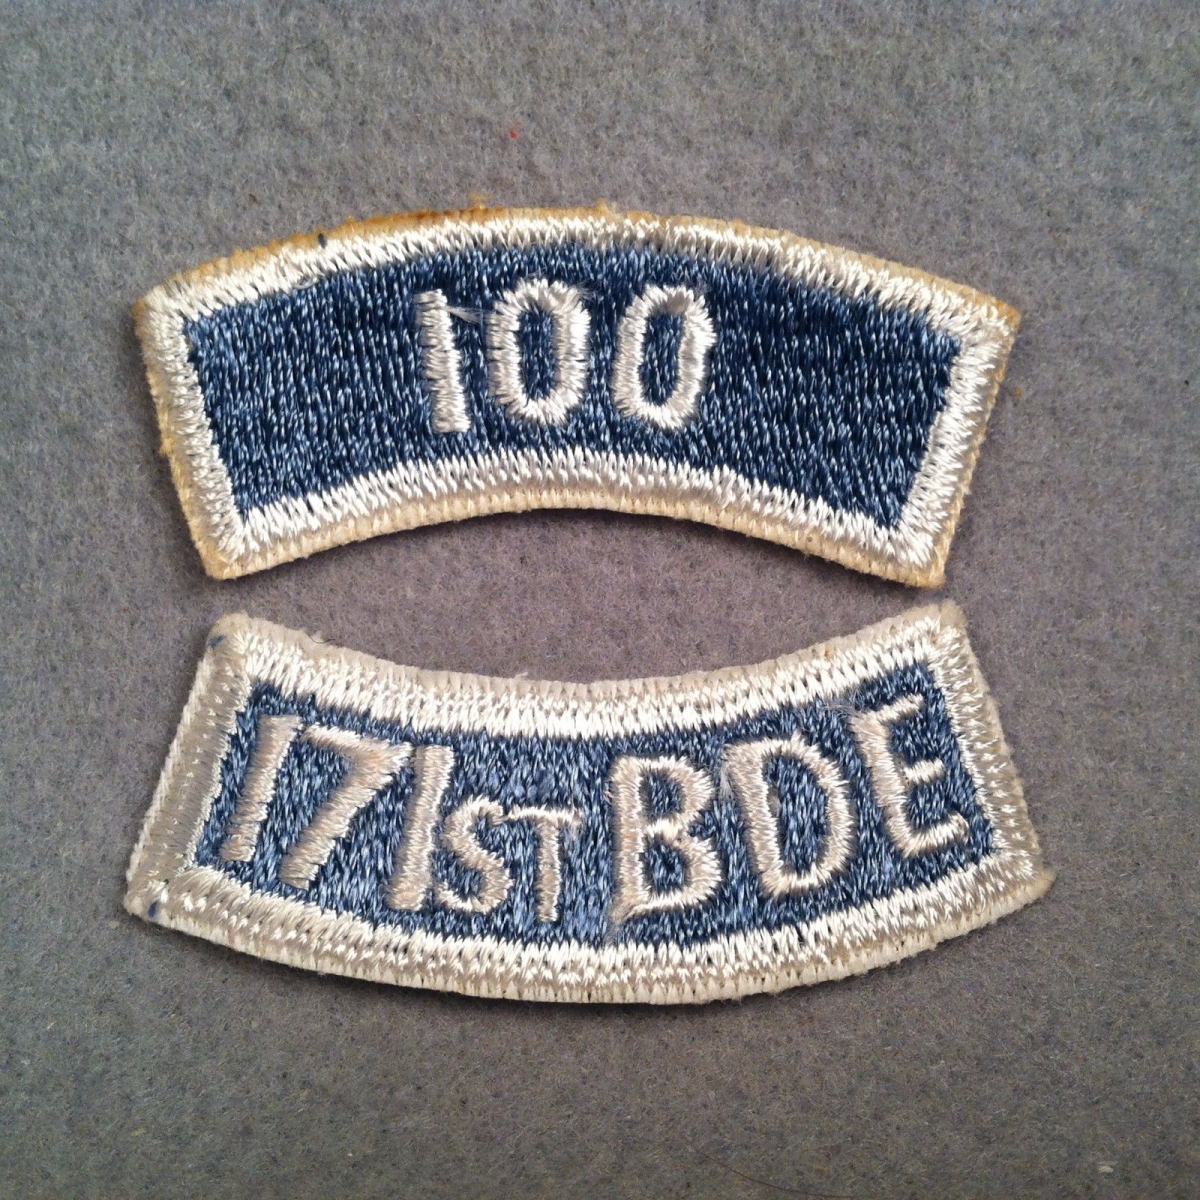 Skies miles qualification tabs of 171st Infantry bde( obsolute)